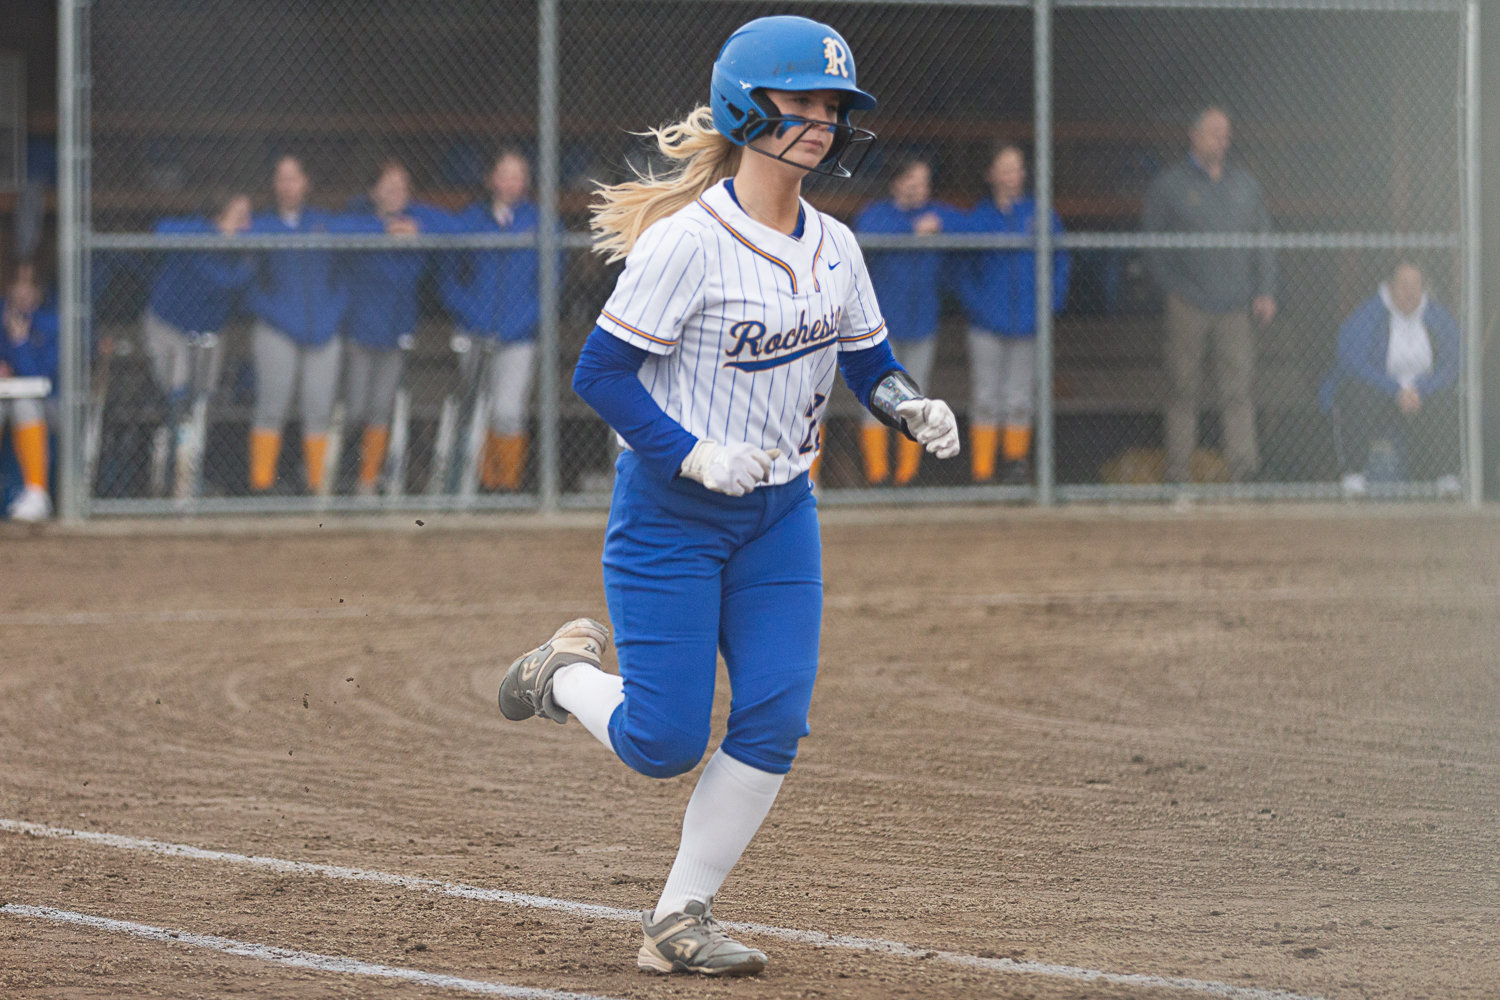 Rochester's Cheyenne Justice trots toward first base against Adna after a walk March 15.